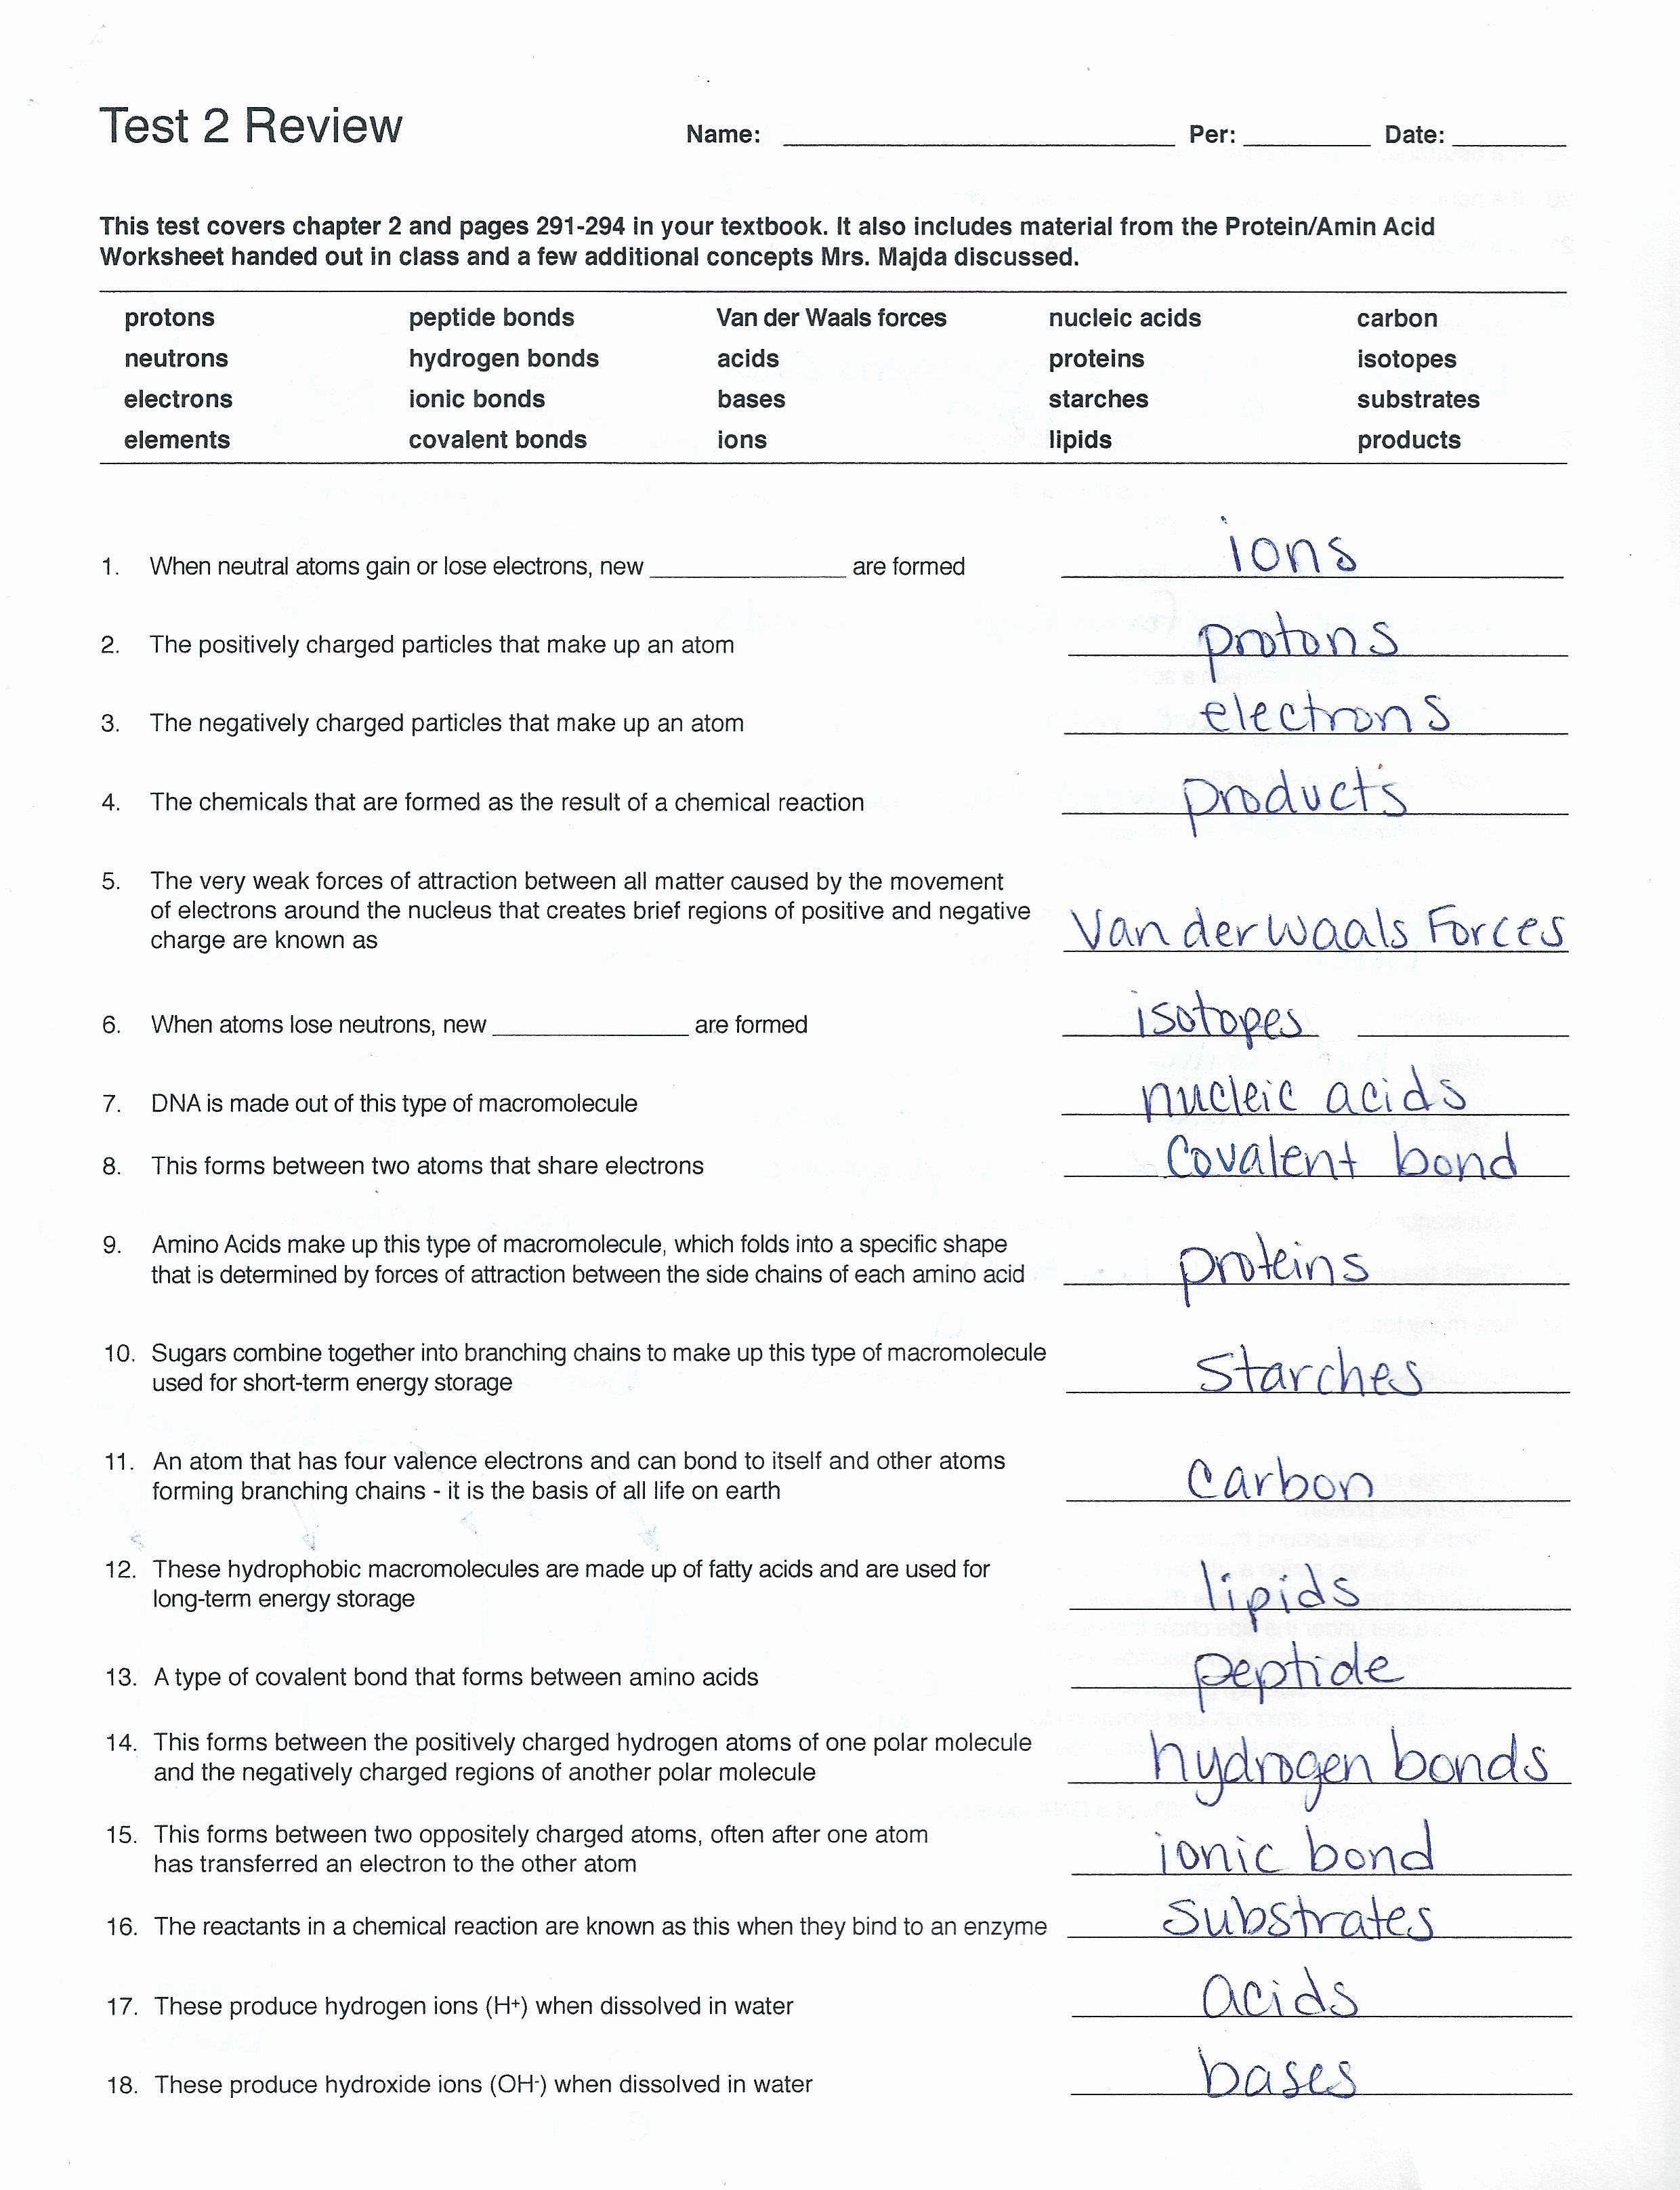 Building Macromolecules Worksheet Answers New Elements and Macromolecules In organisms Worksheet Answers